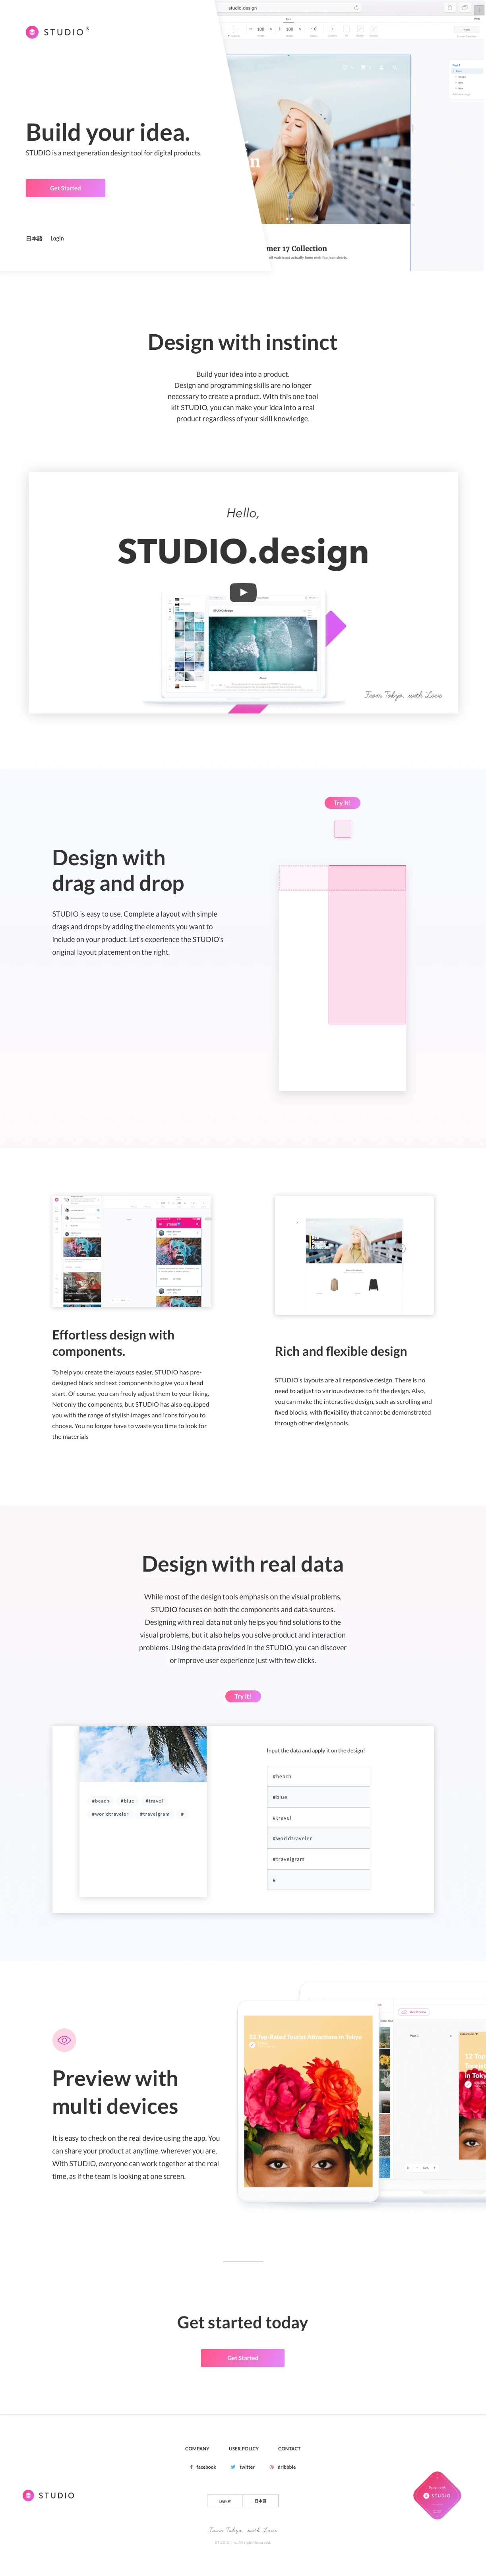 STUDIO Landing Page Example: STUDIO is a UI design tool for a new prototyping that goes beyond your imagination. Our vision is to provide a platform for anyone to change their idea into a real product.